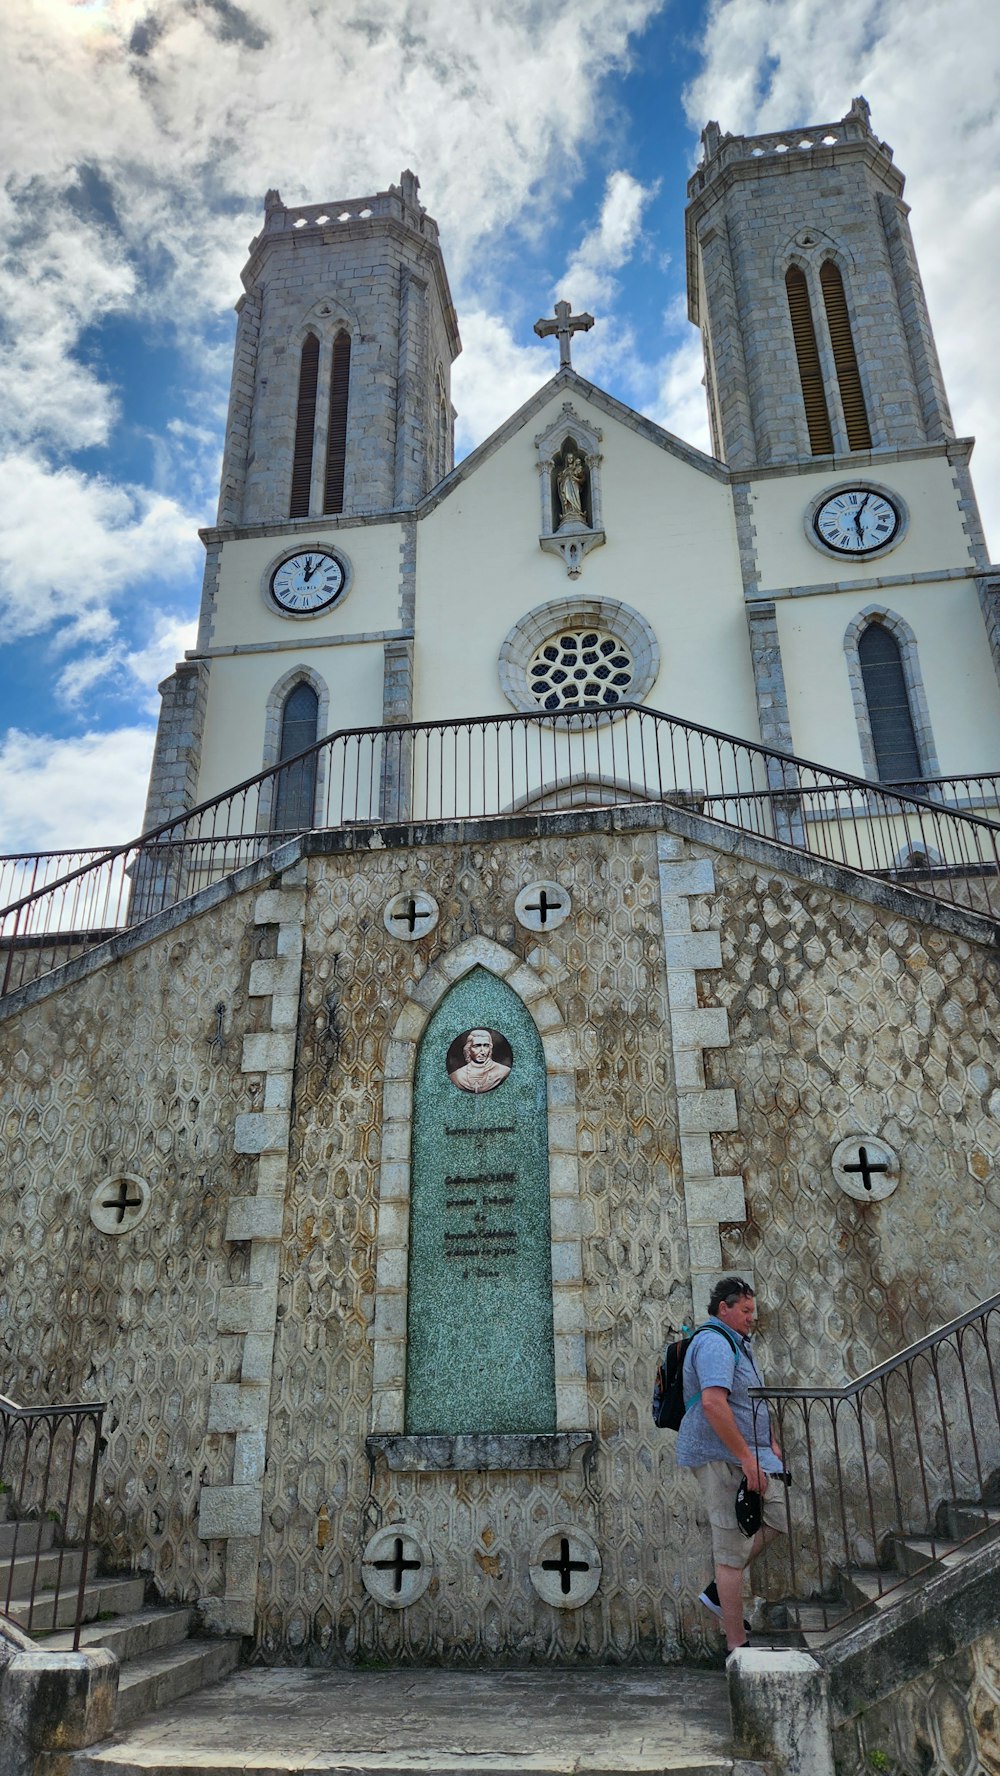 a man is standing in front of a church